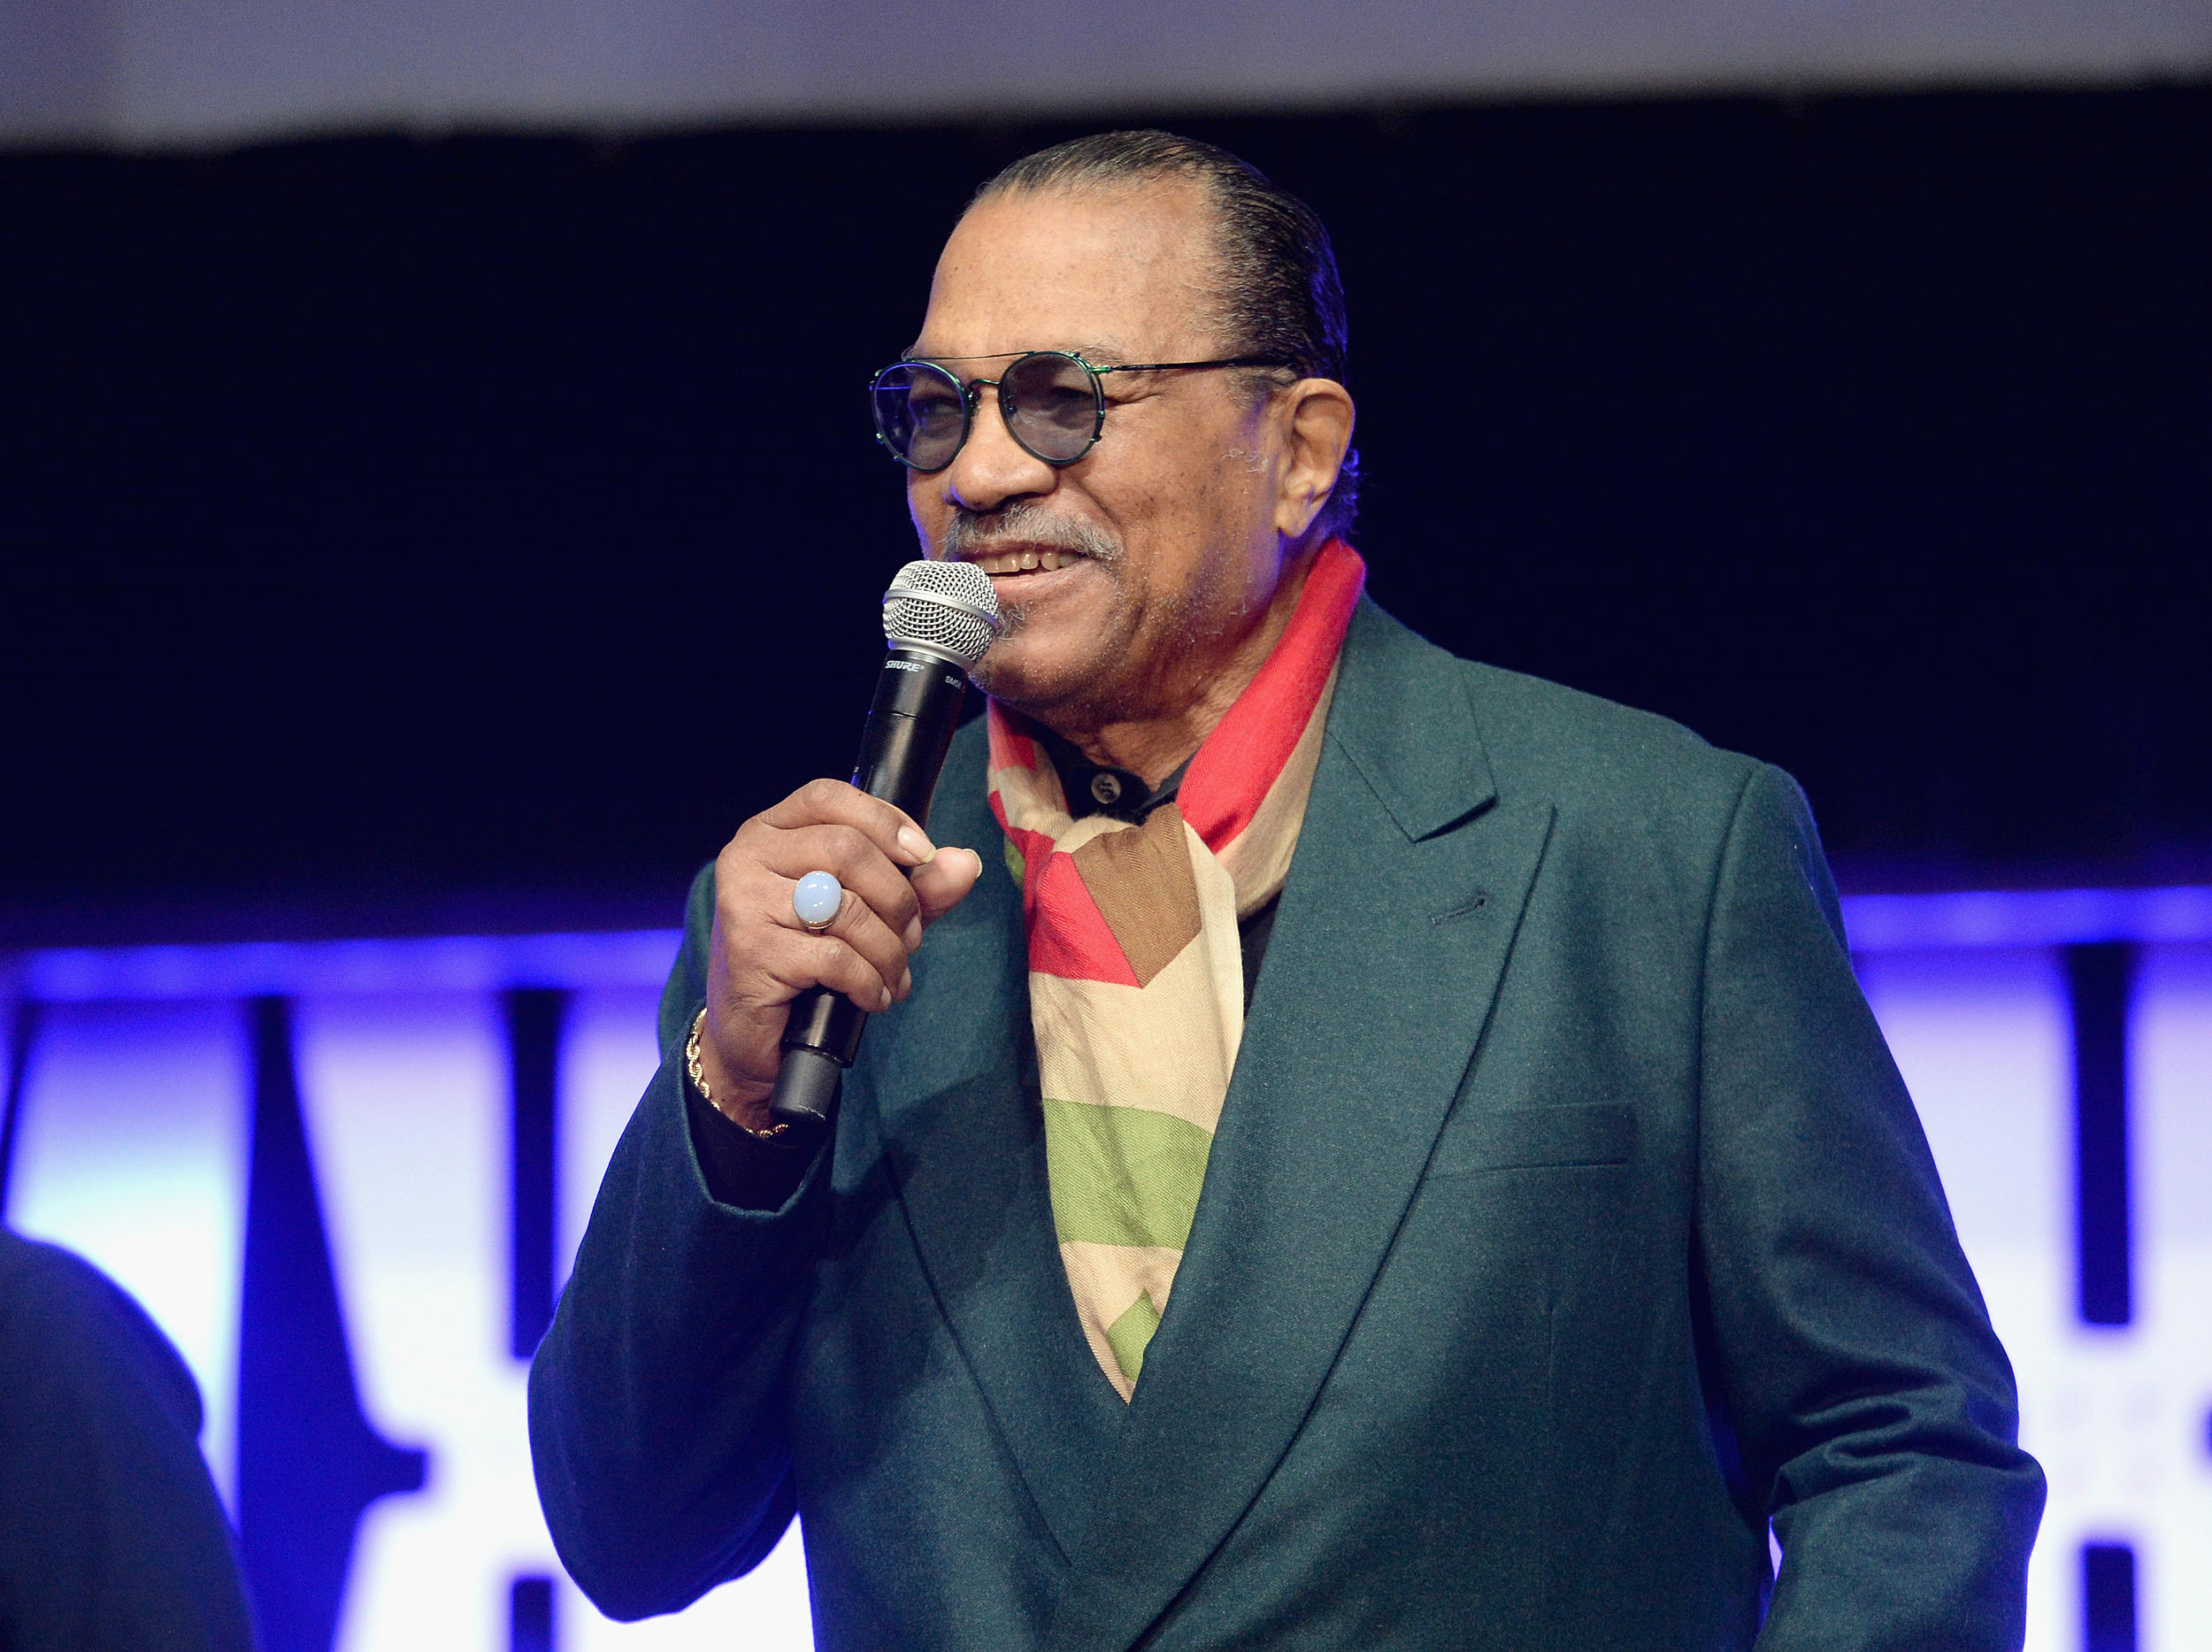 Star Wars' star Billy Dee Williams will be a guest at Motor City